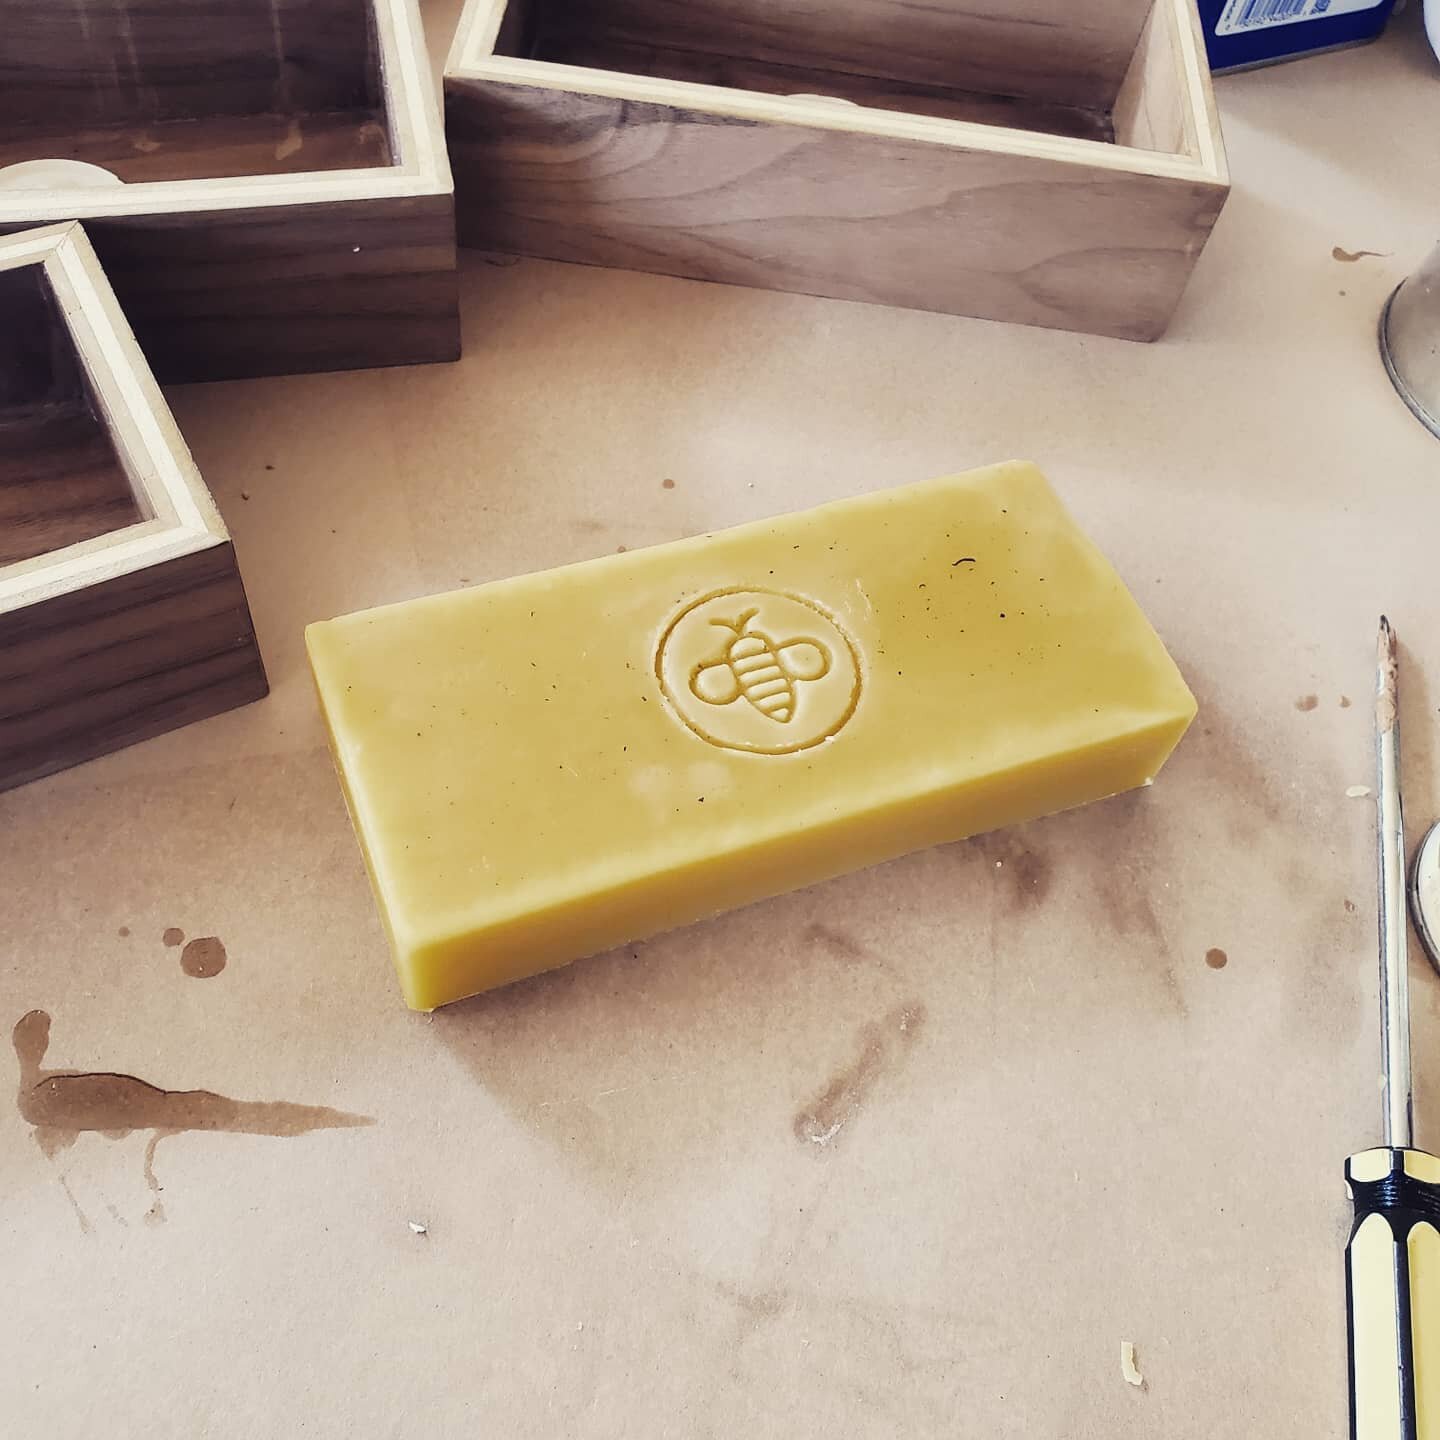 Just made these molds... trying to figure out the best way to prevent the wax from sticking inside the logo!

#bee #bees #honey #honeybees #business #familybusiness #apiary #savethebees #love #rawhoney #beekeeping #beekeeper #beeswax #farm #beesofins